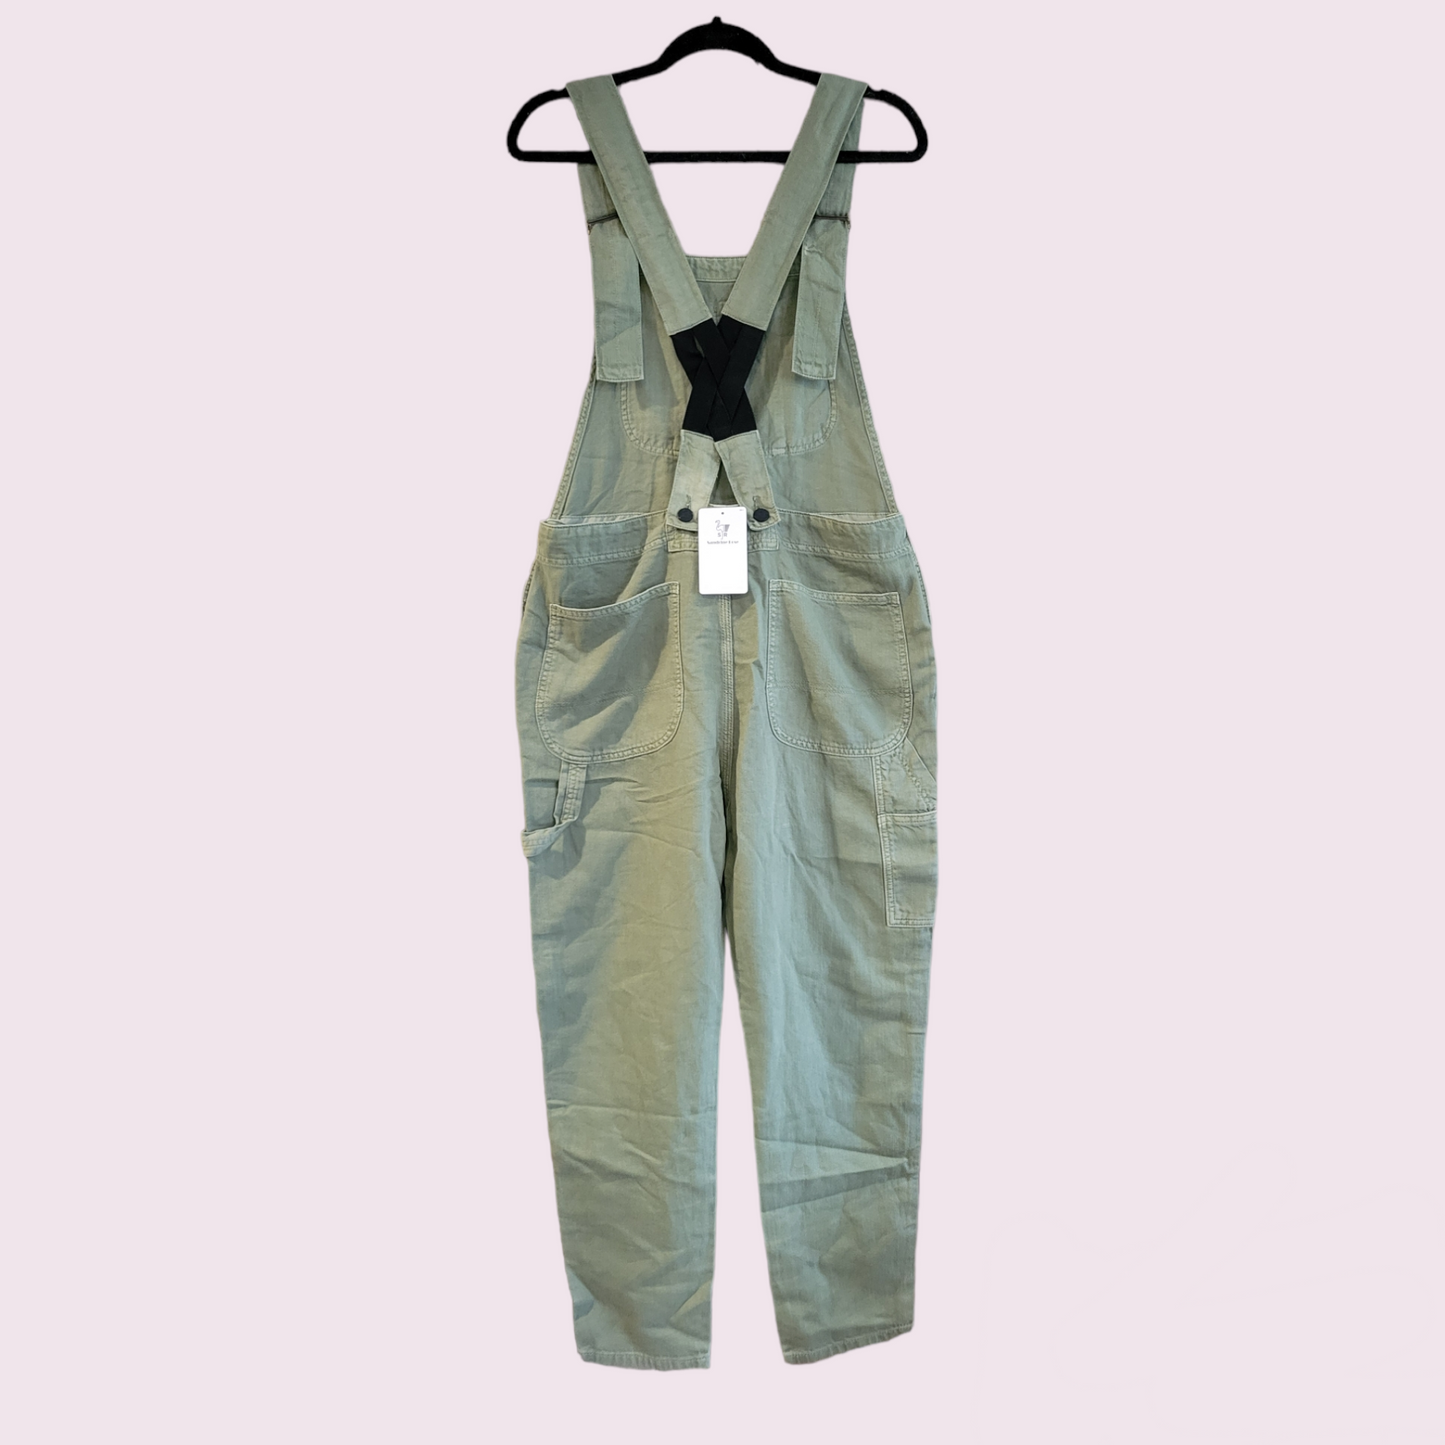 Free people overalls- New